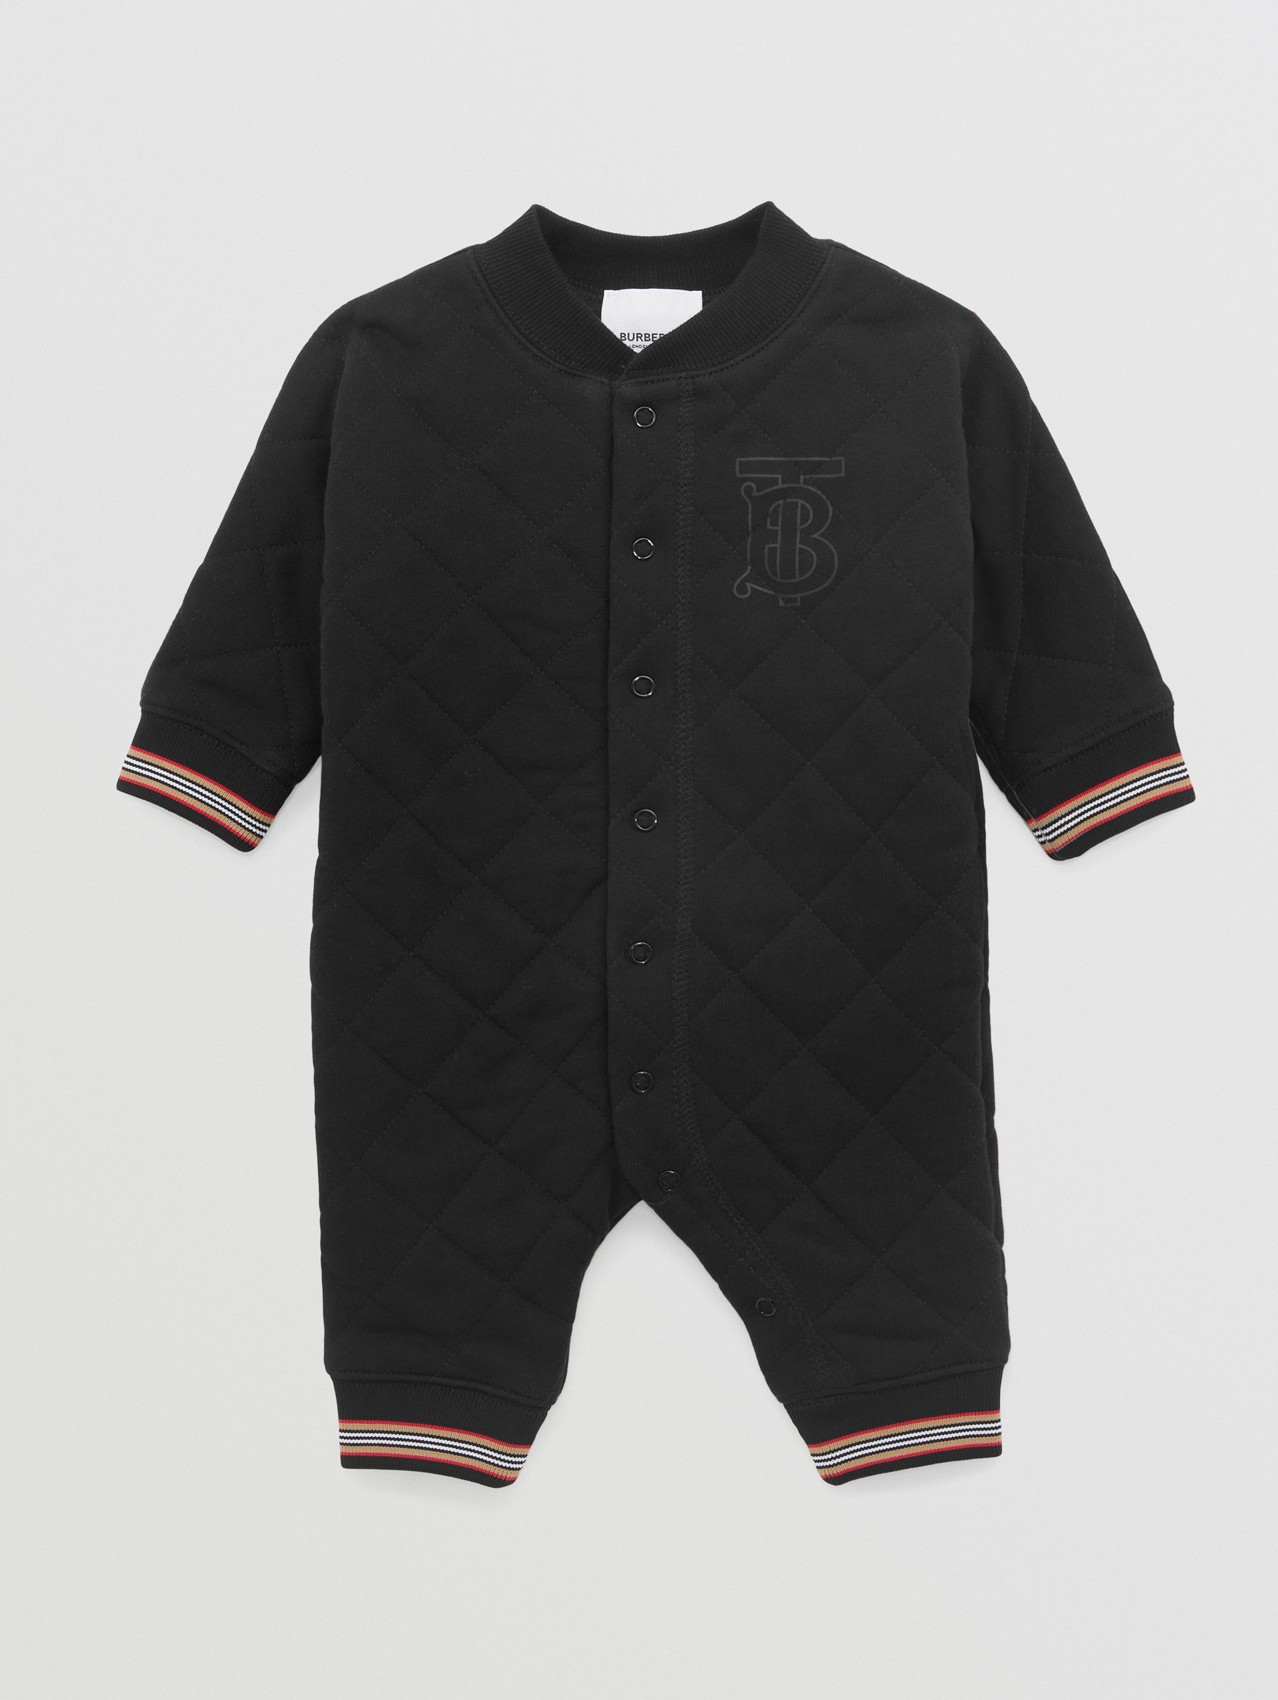 Baby Designer Clothing | Burberry Baby | Burberry® Official